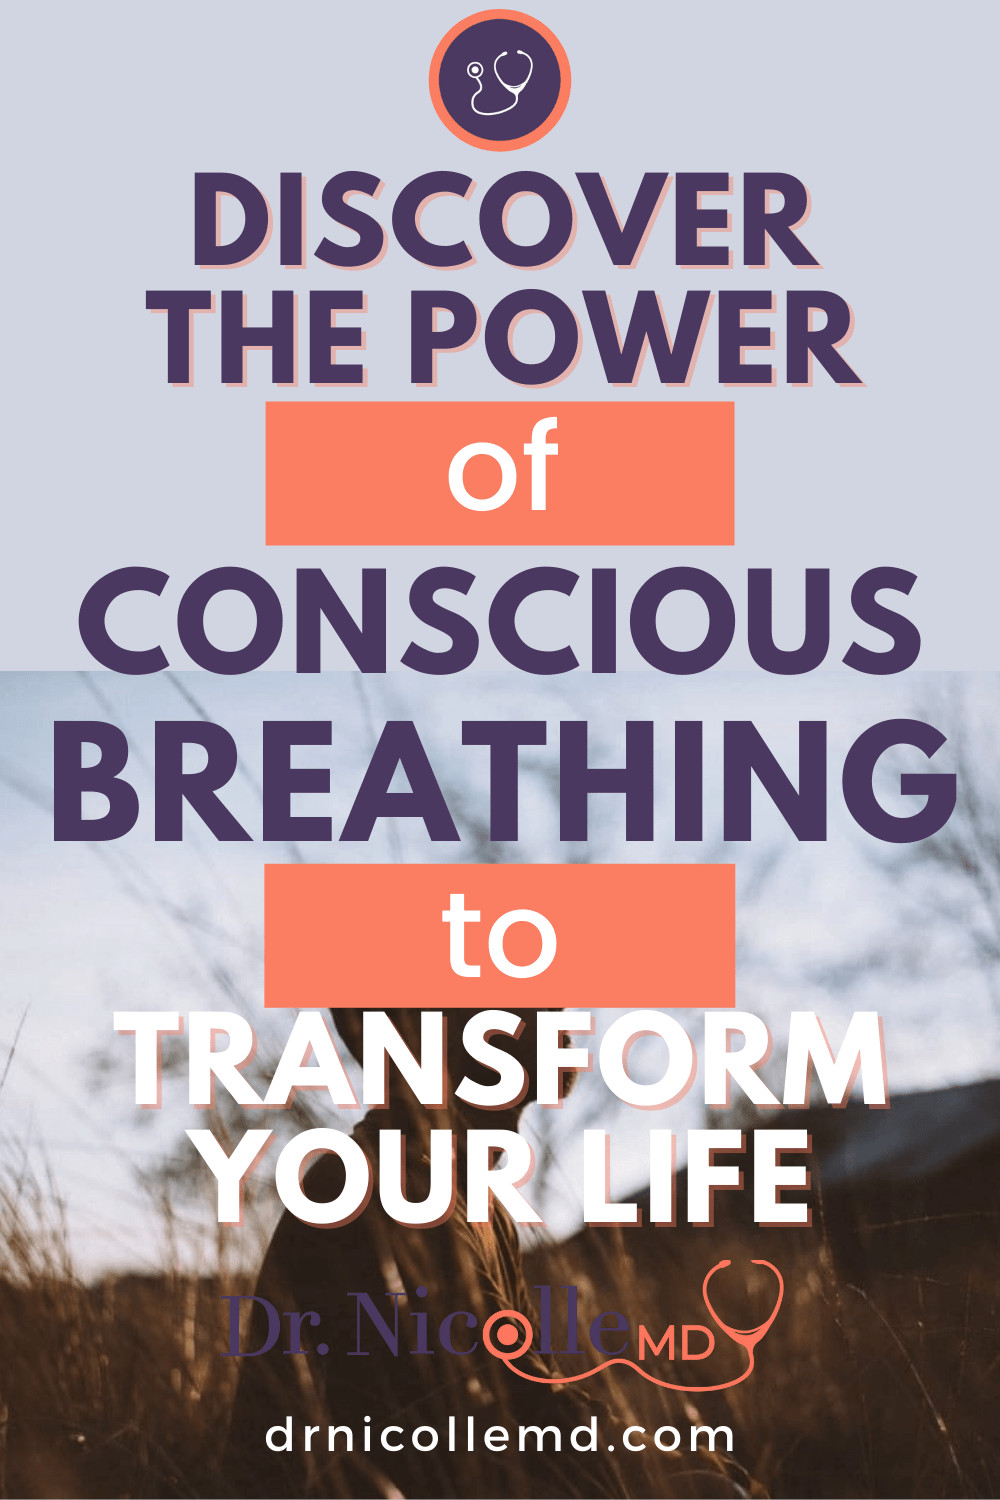 Discover the Power of Conscious Breathing to Transform Your Life